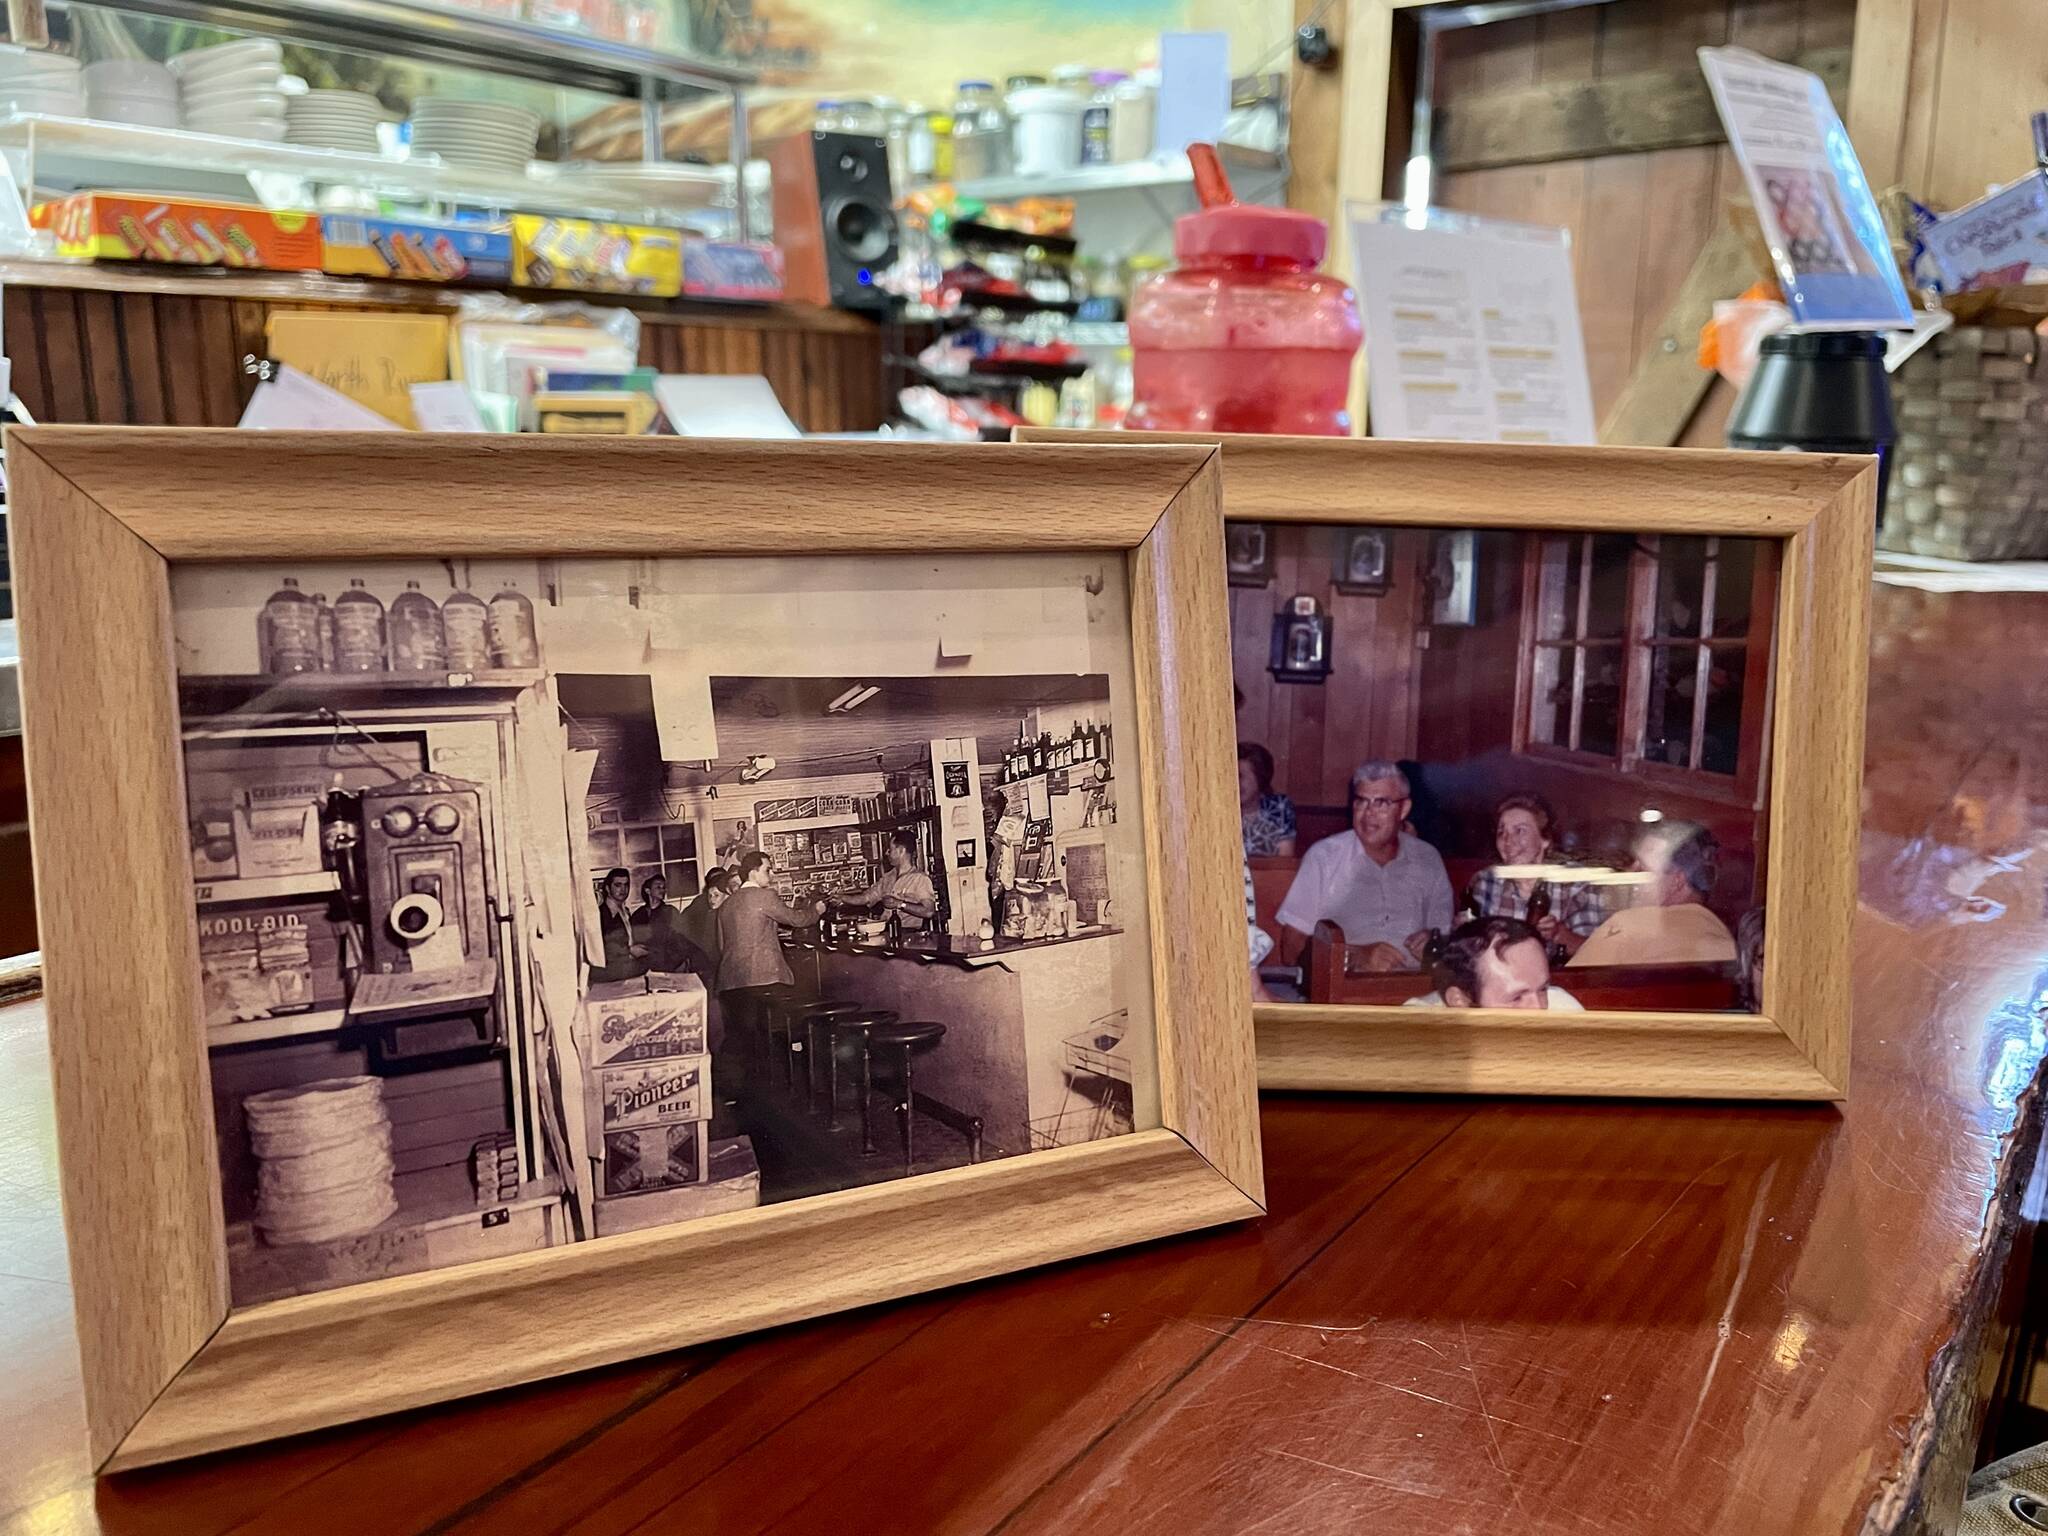 Old photos of previous incarnations of the bar now called the Artic Pub are on displayed in the recently reopened bar. (Michael S. Lockett / The Daily World)